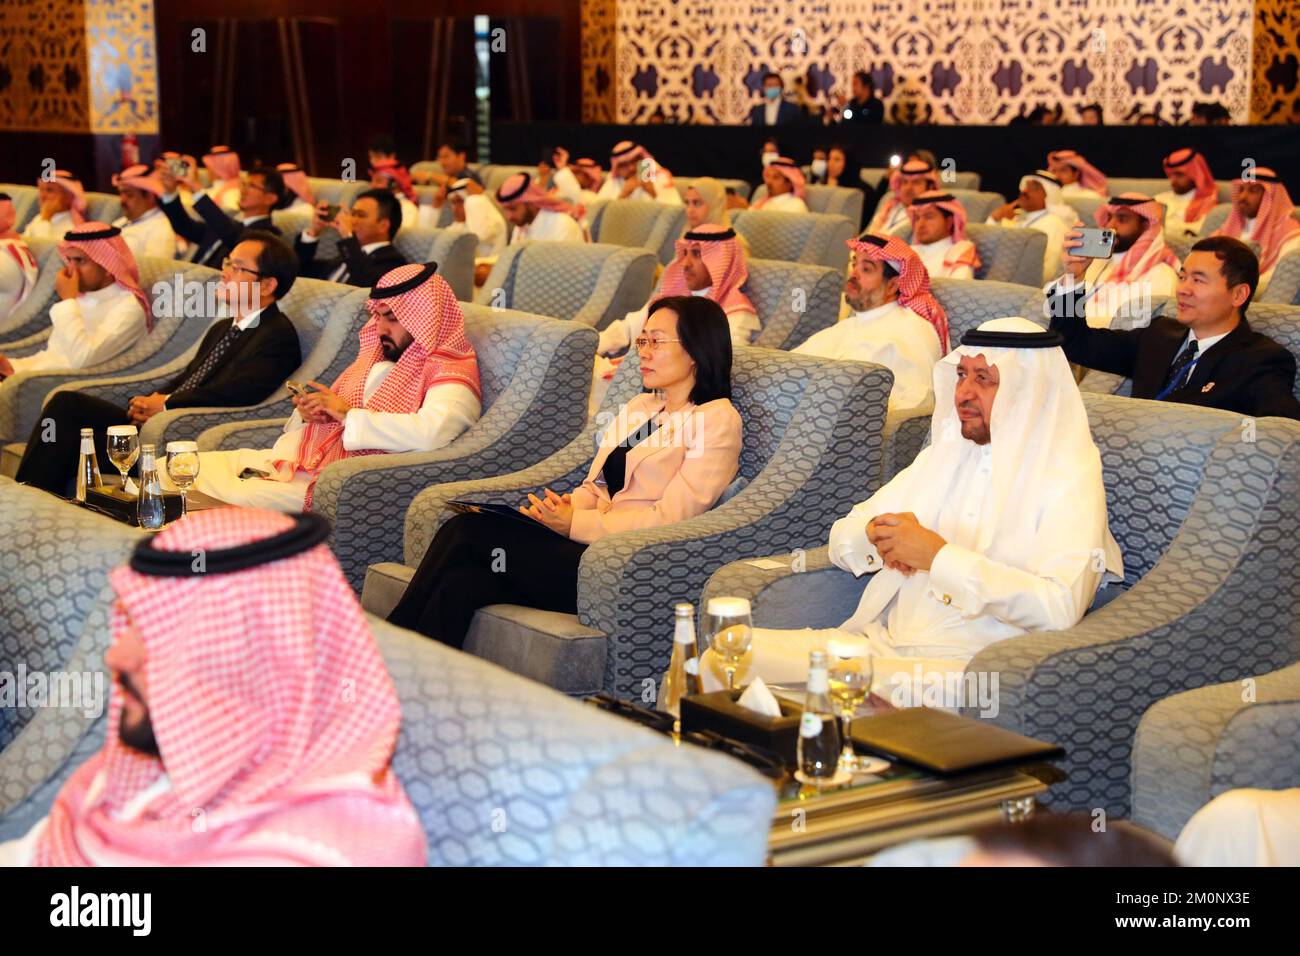 Riyadh, Saudi Arabia. 5th Dec, 2022. Guests attend the 2022 Chinese-Arab Media Cooperation Forum in Riyadh, Saudi Arabia, Dec. 5, 2022. The forum, co-sponsored by the China Media Group (CMG) and Saudi Arabia's Ministry of Media, gathered more than 150 government officials, representatives of media organizations, and scholars from China and 22 Arab countries. Credit: Sui Xiankai/Xinhua/Alamy Live News Stock Photo